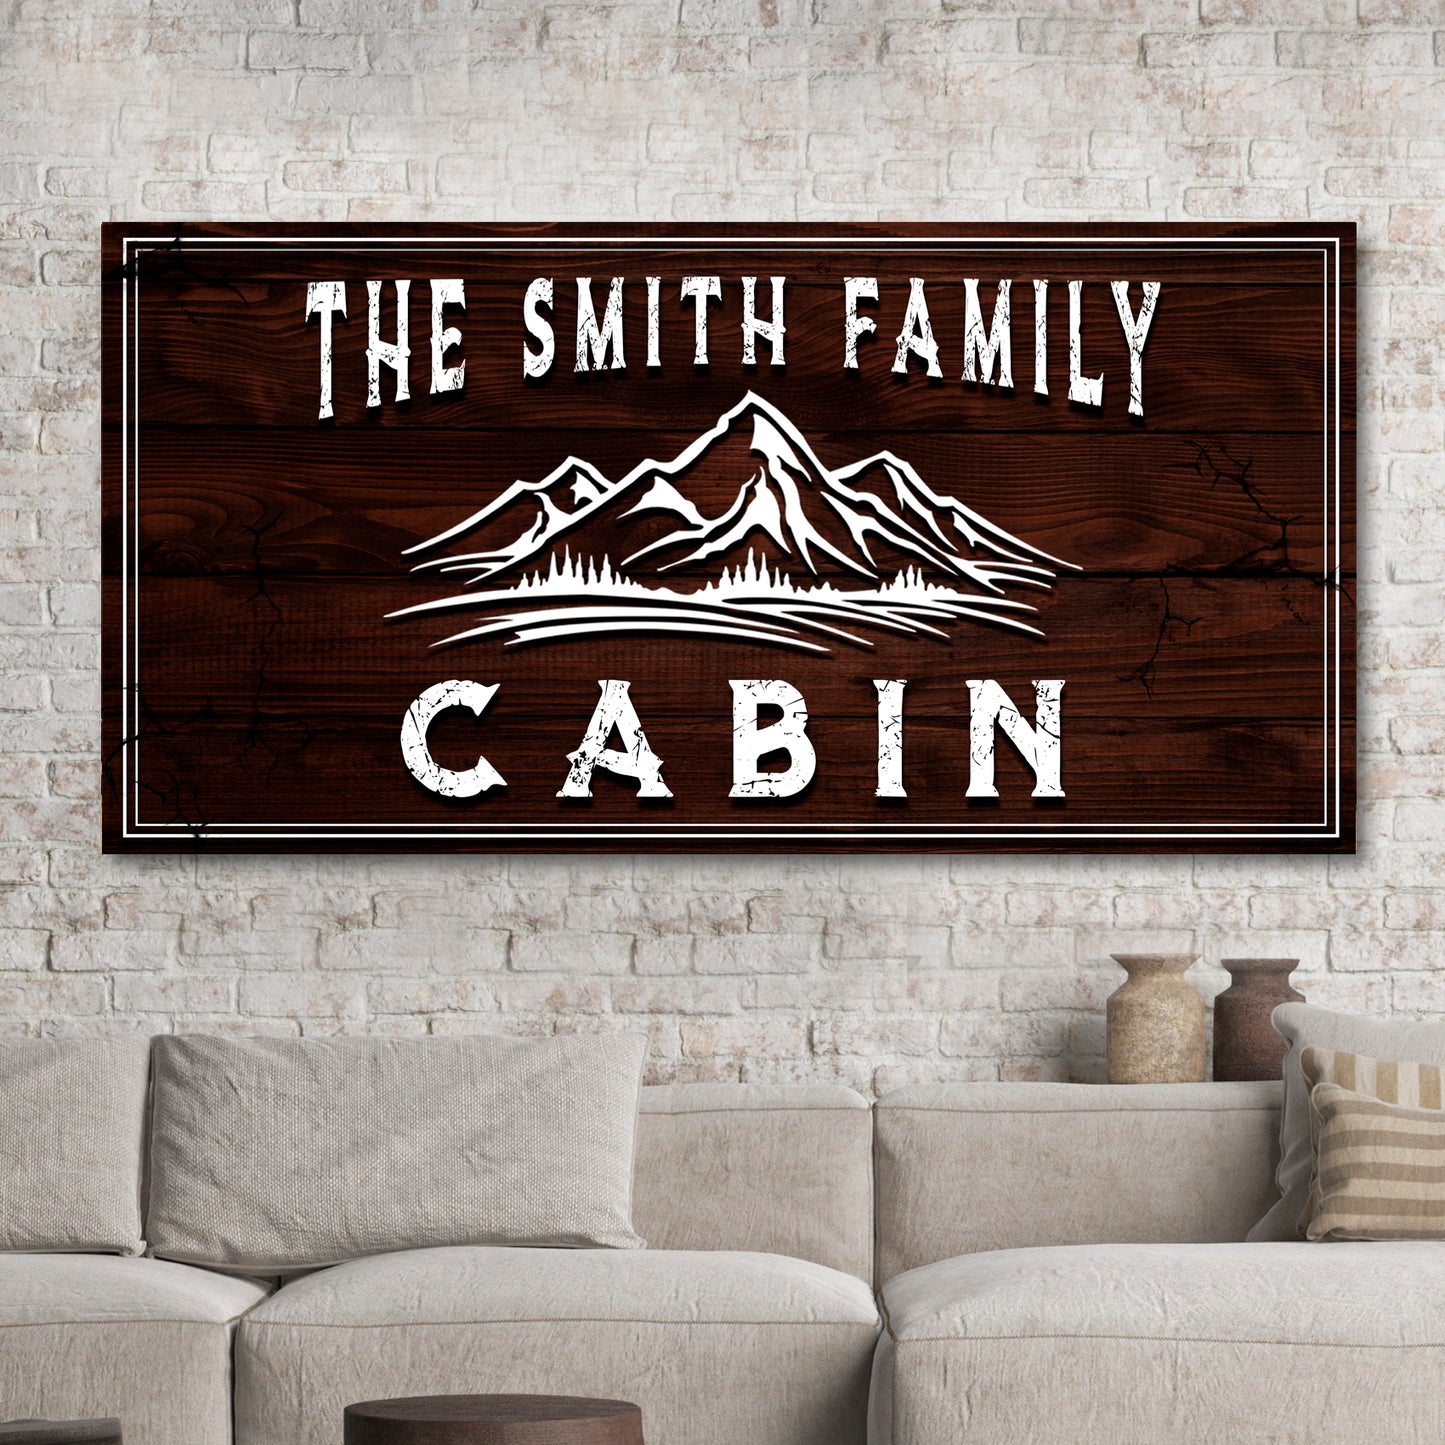 Family Cabin Sign - Image by Tailored Canvases